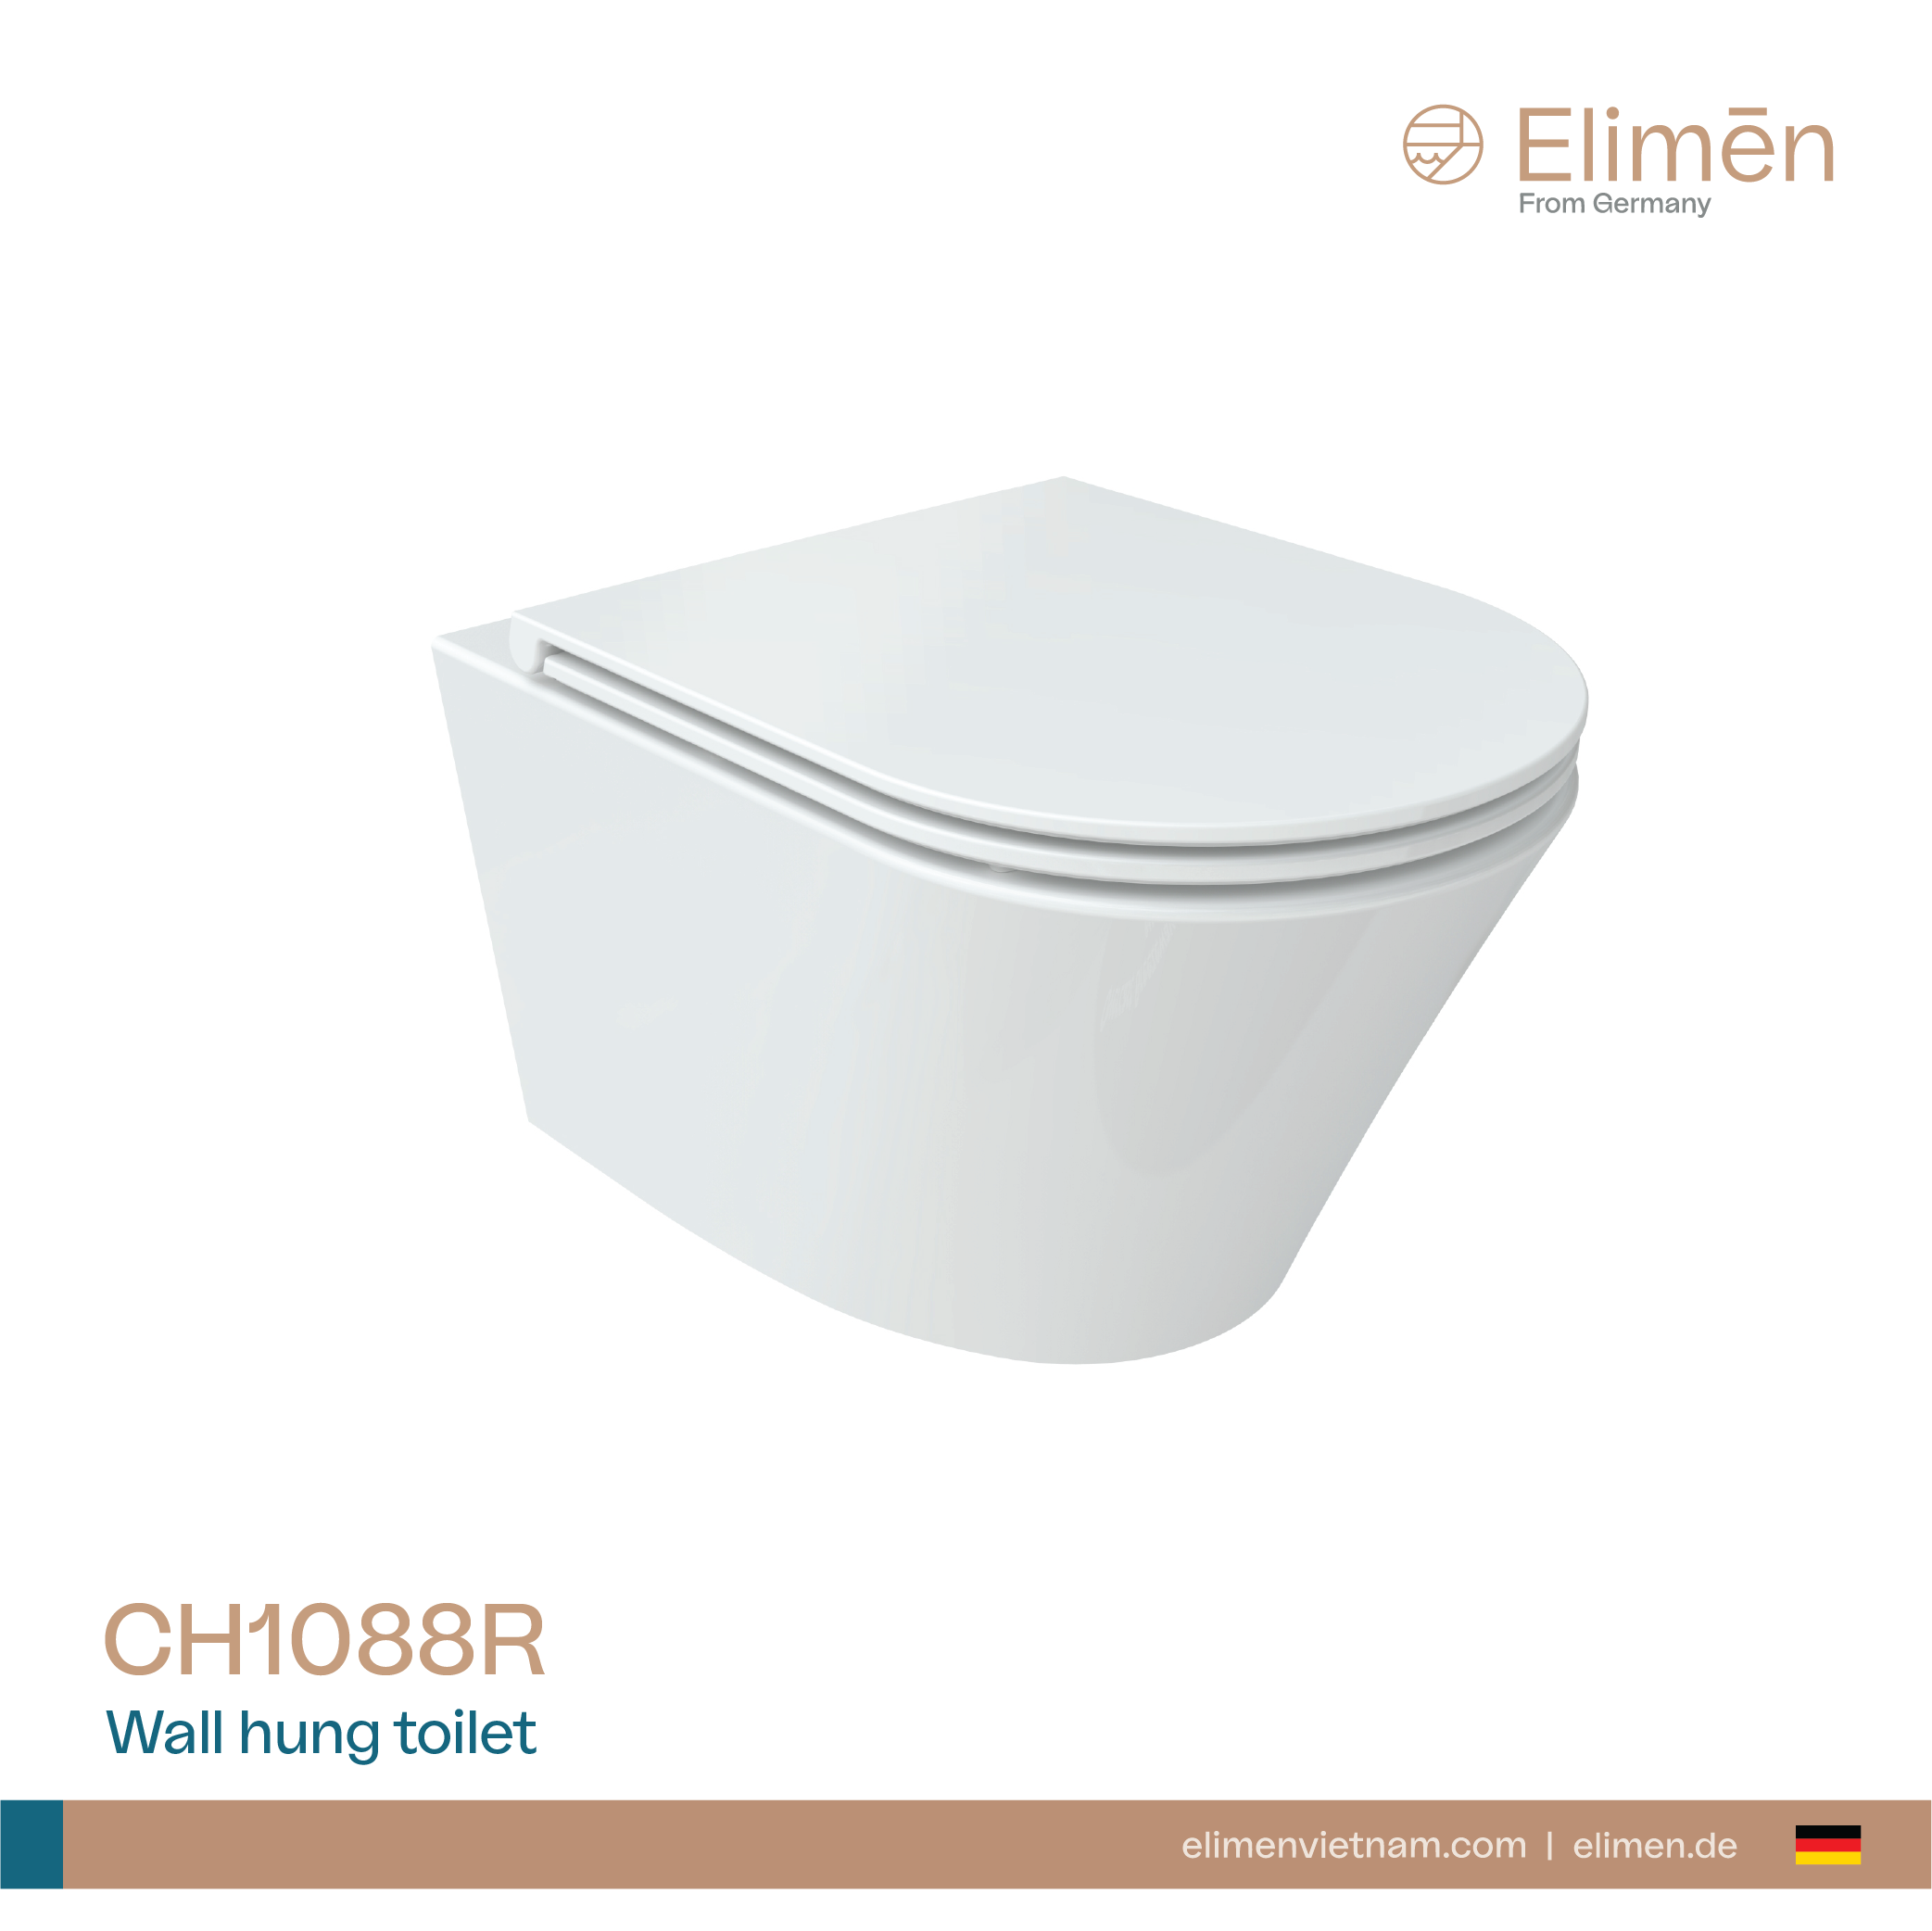 Elimen wall-hung toilet - Code CH1088-305